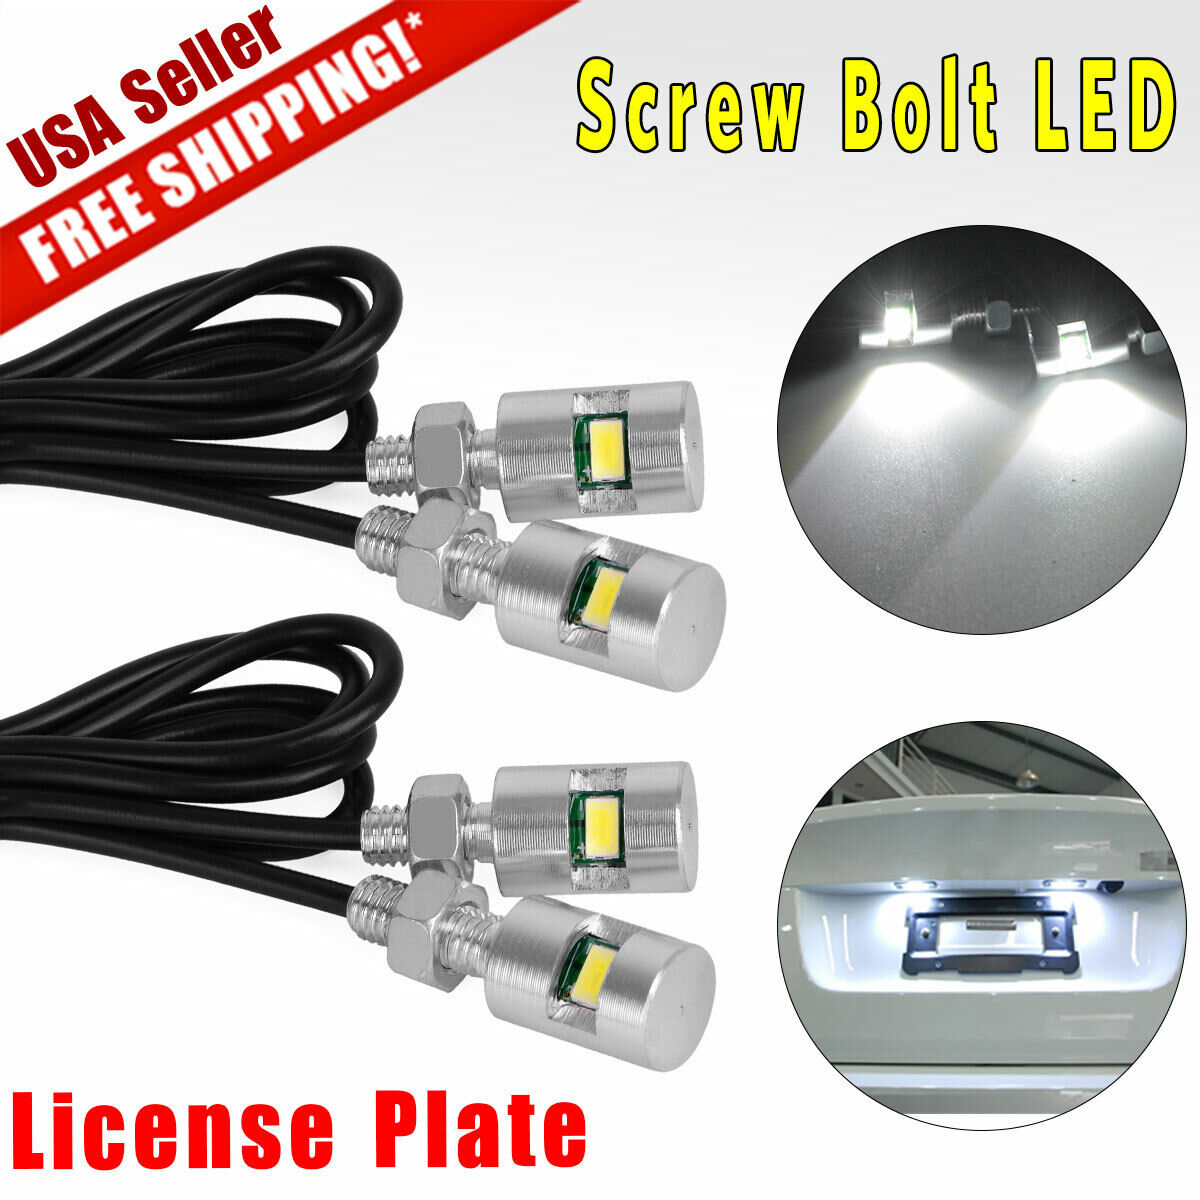 4X White Motorcycle Screw Bolt Lamp Car Universal License Plate Light SMD LED US